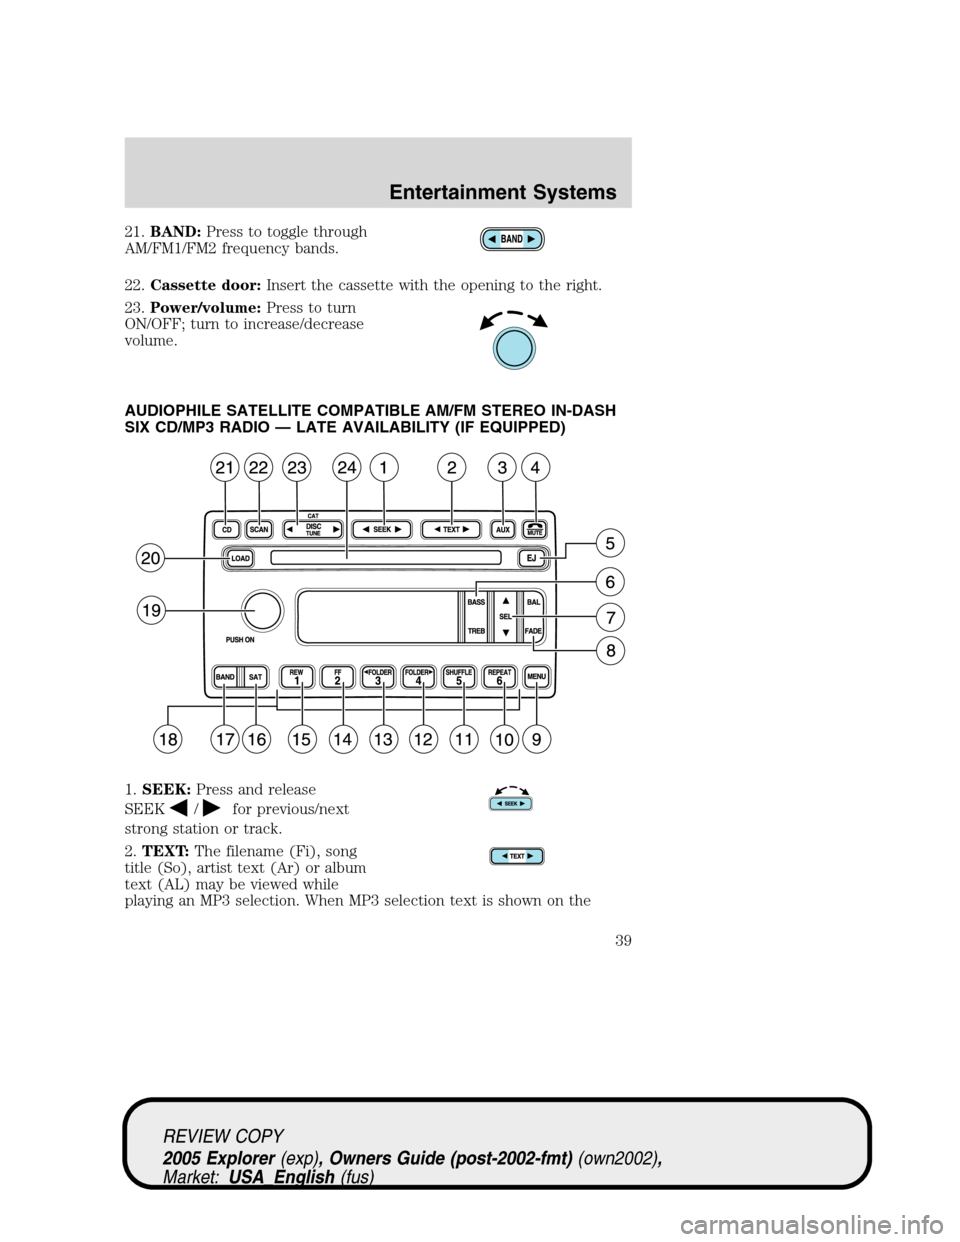 FORD EXPLORER 2005 3.G Owners Manual 21.BAND:Press to toggle through
AM/FM1/FM2 frequency bands.
22.Cassette door:Insert the cassette with the opening to the right.
23.Power/volume:Press to turn
ON/OFF; turn to increase/decrease
volume.
